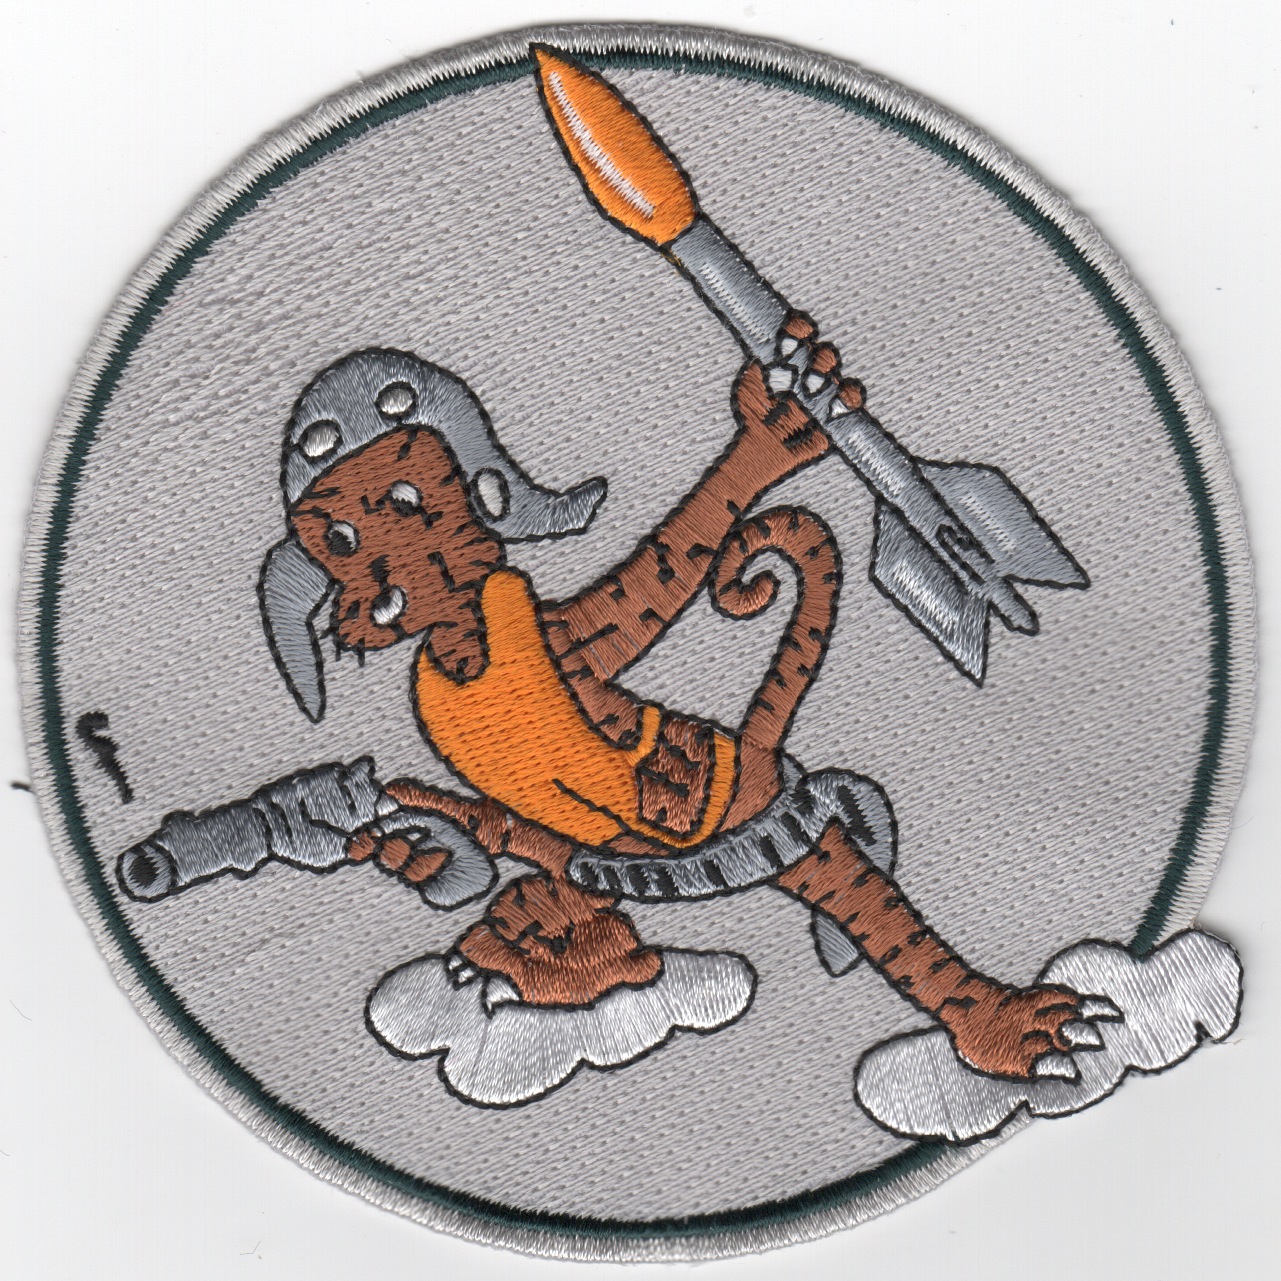 VFA-81 'Historical' Squadron Patch